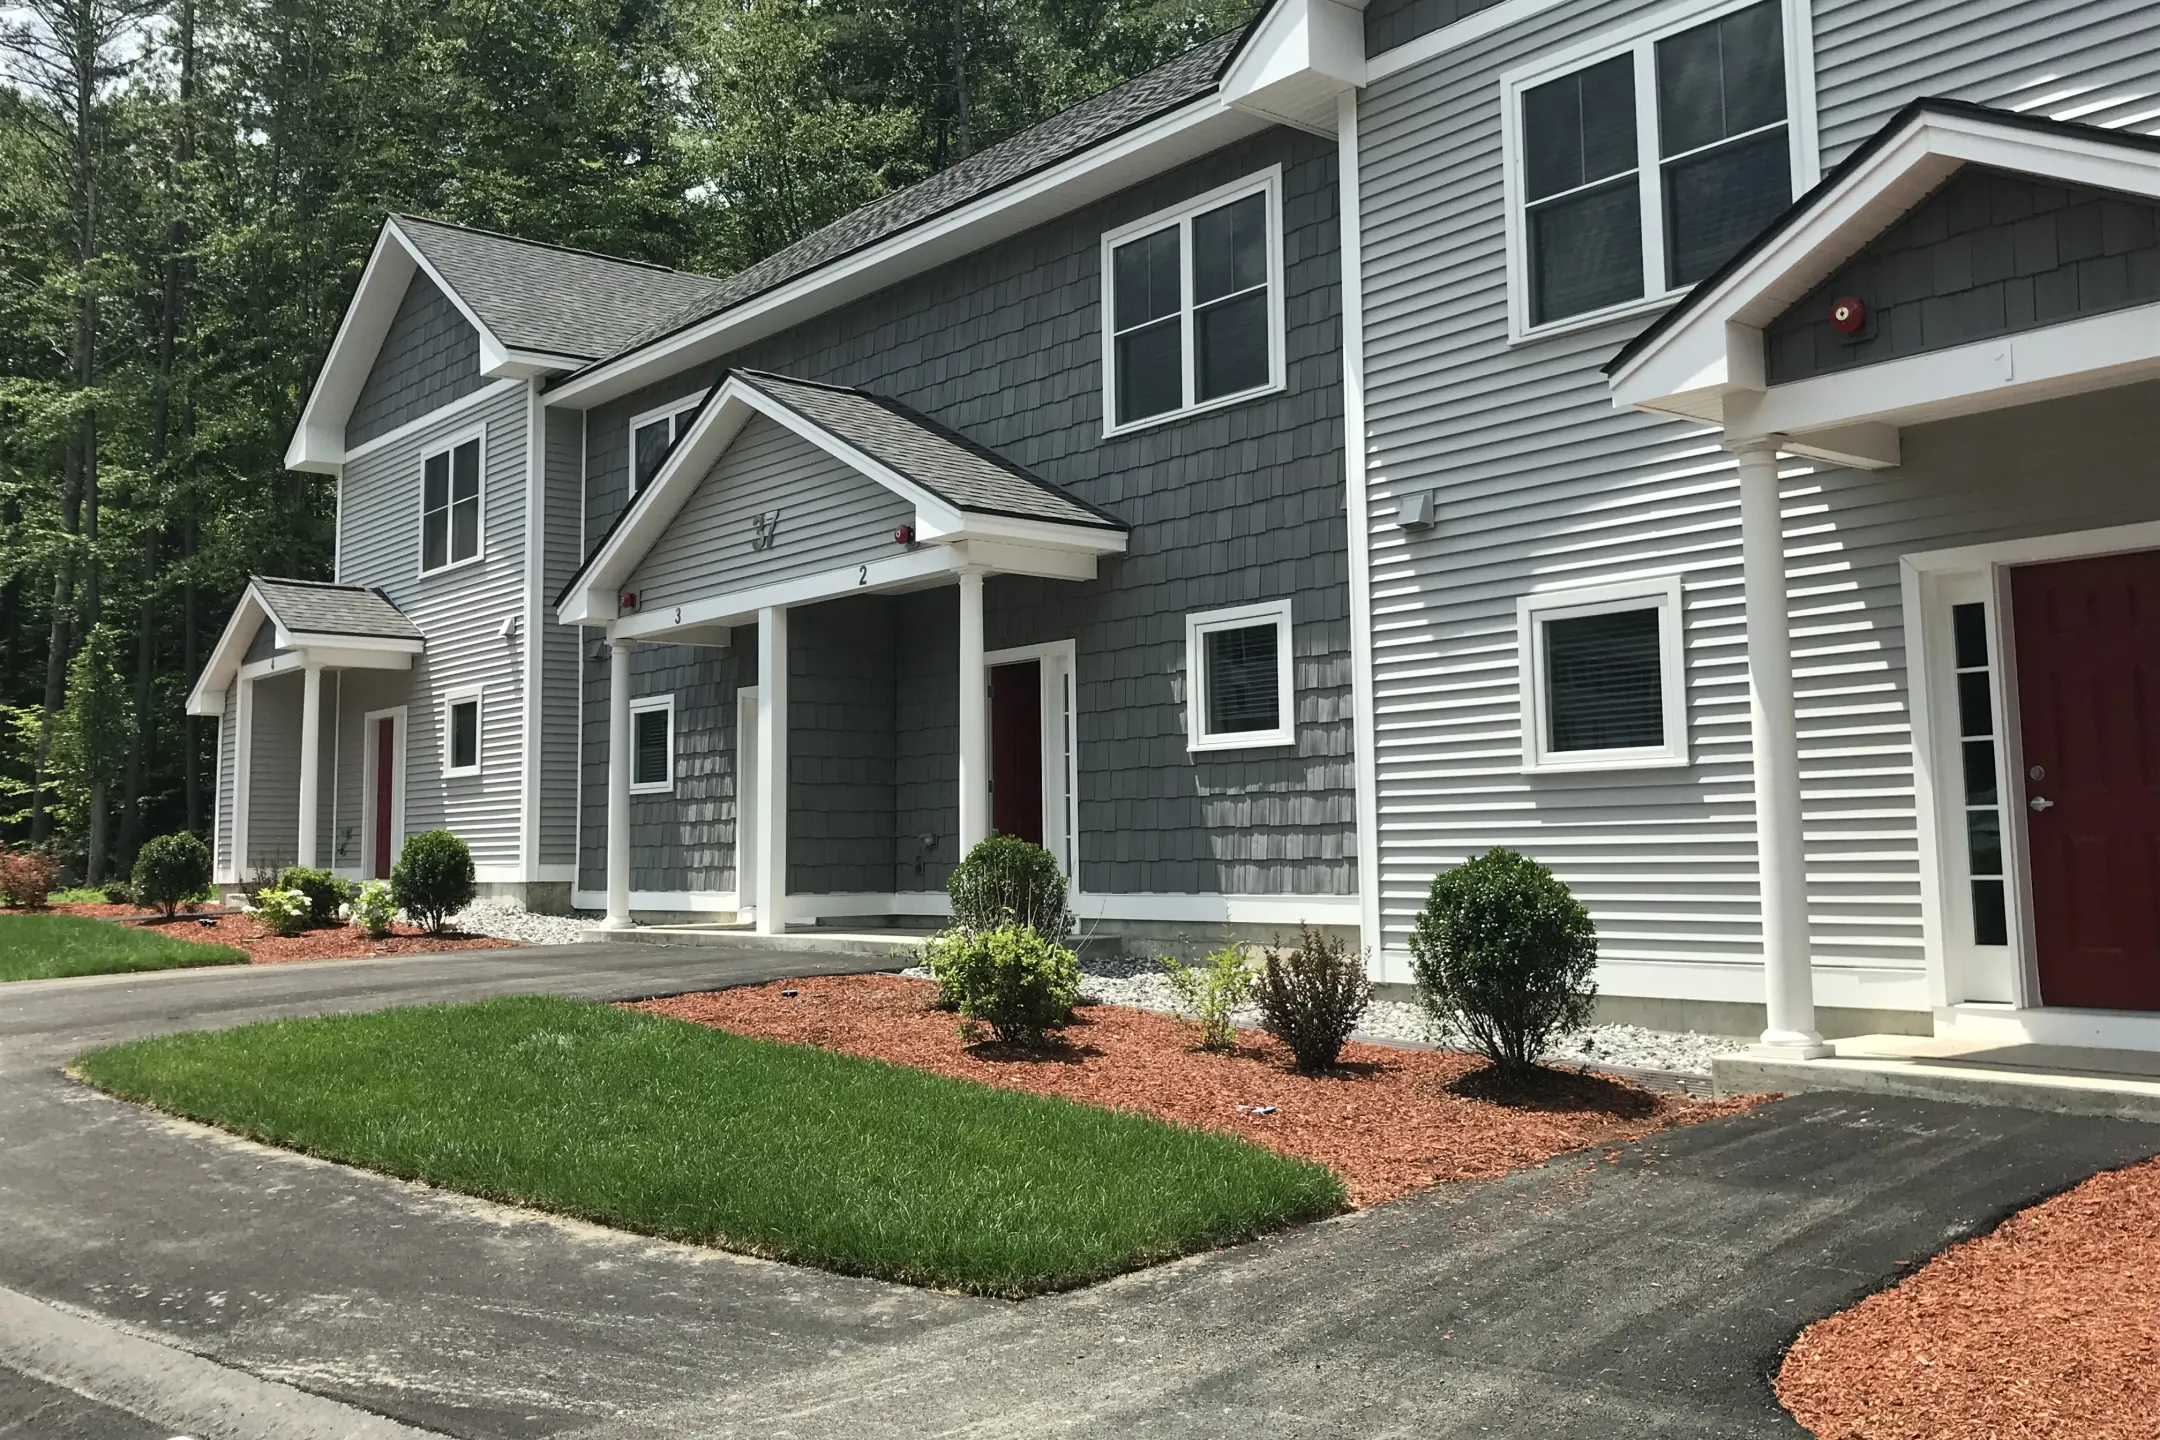 Building - The Ridge At Eastern Trails Apartments and Townhomes - Milford, NH